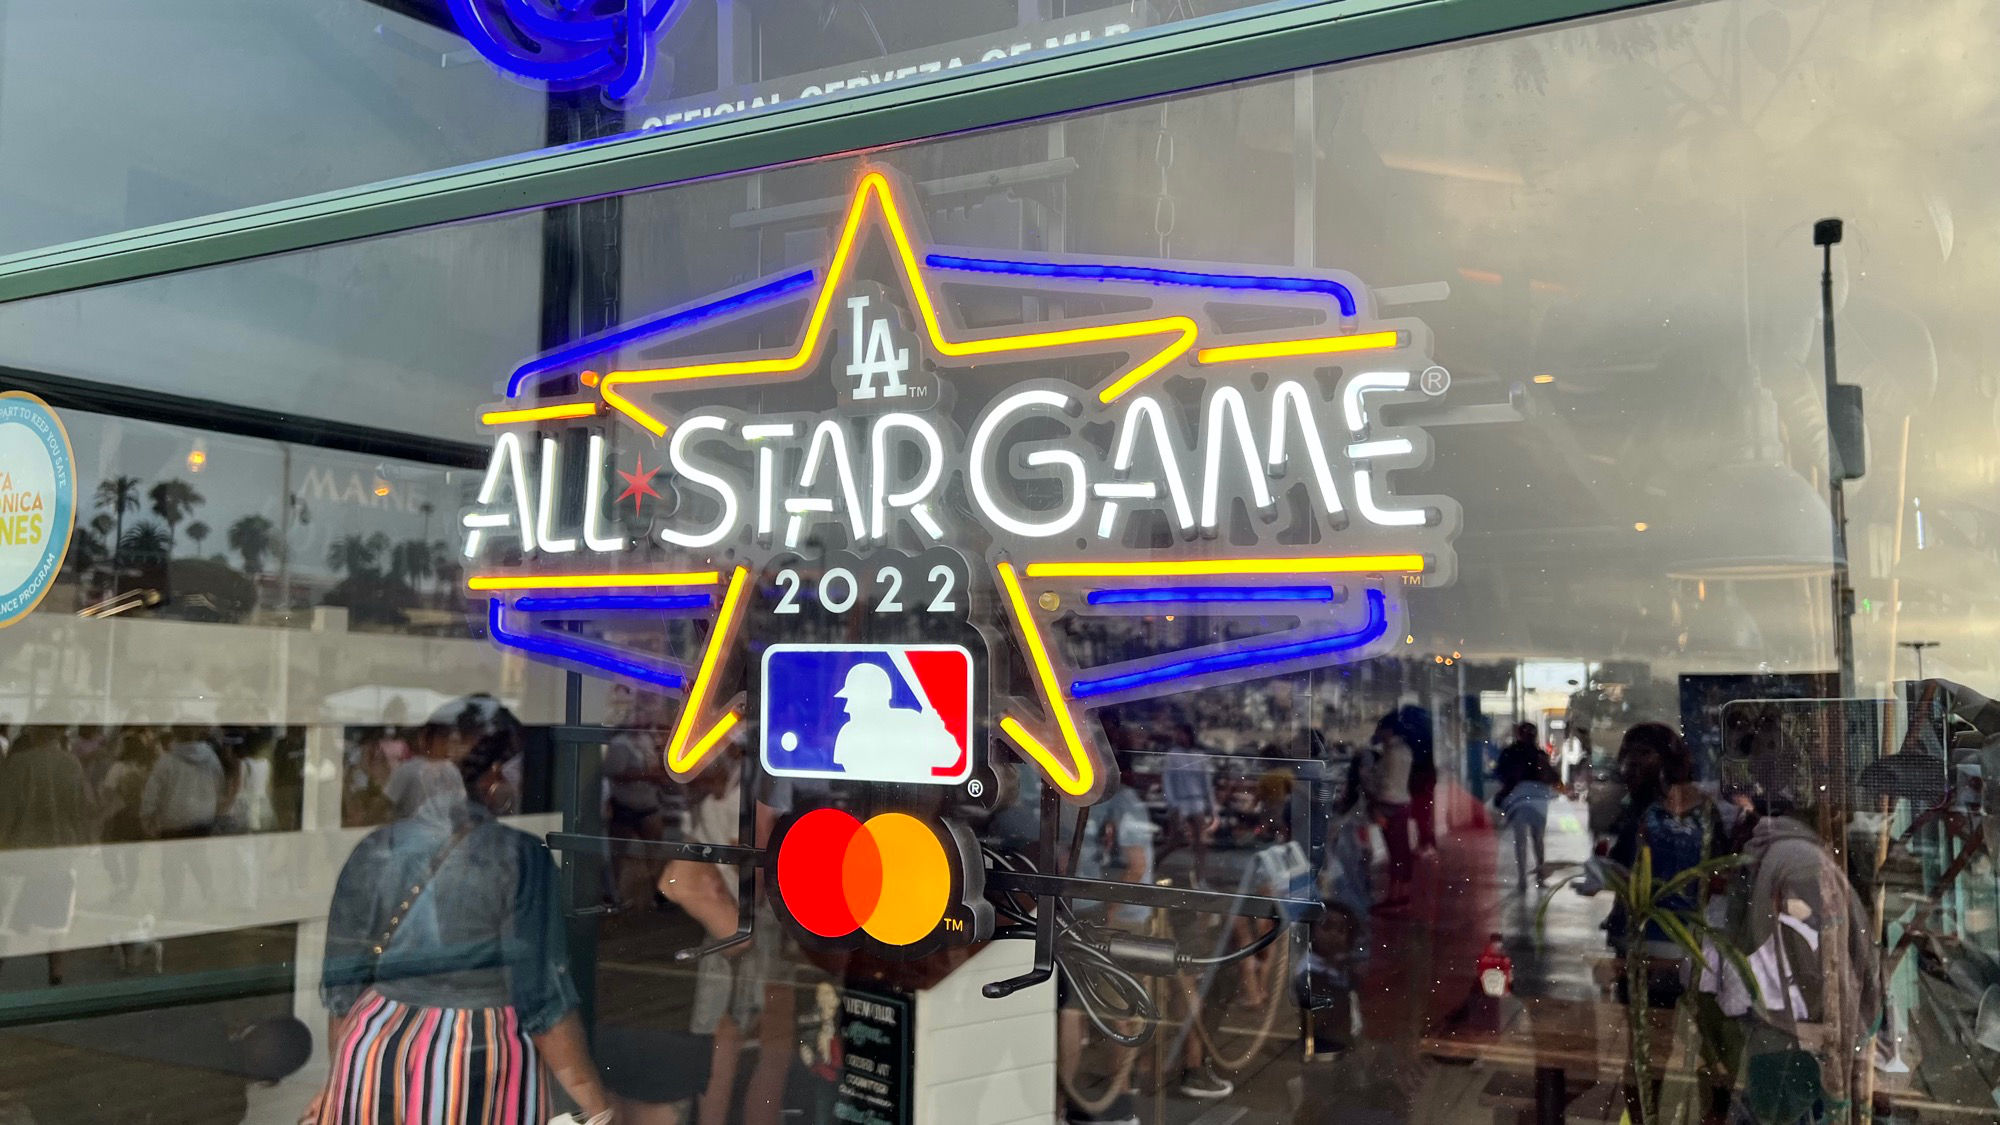 All Star Game Neon Sign